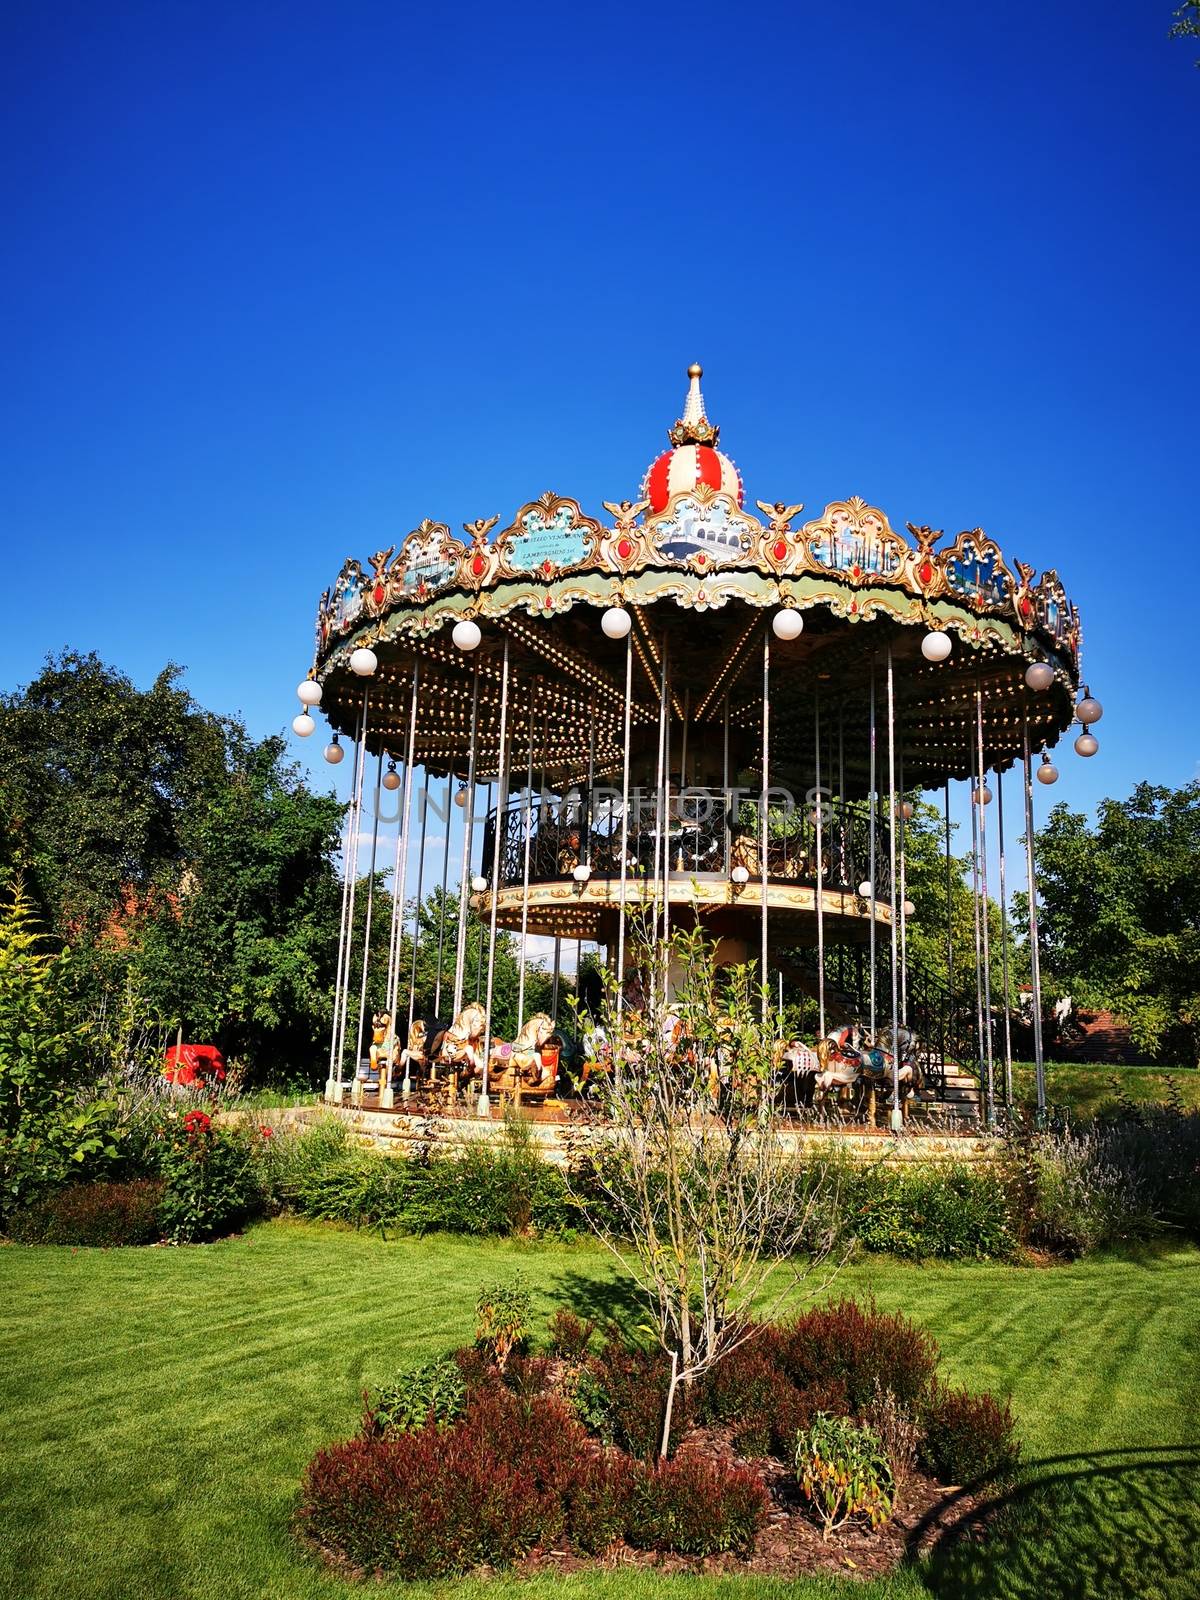 A carousel in front of a building. High quality photo